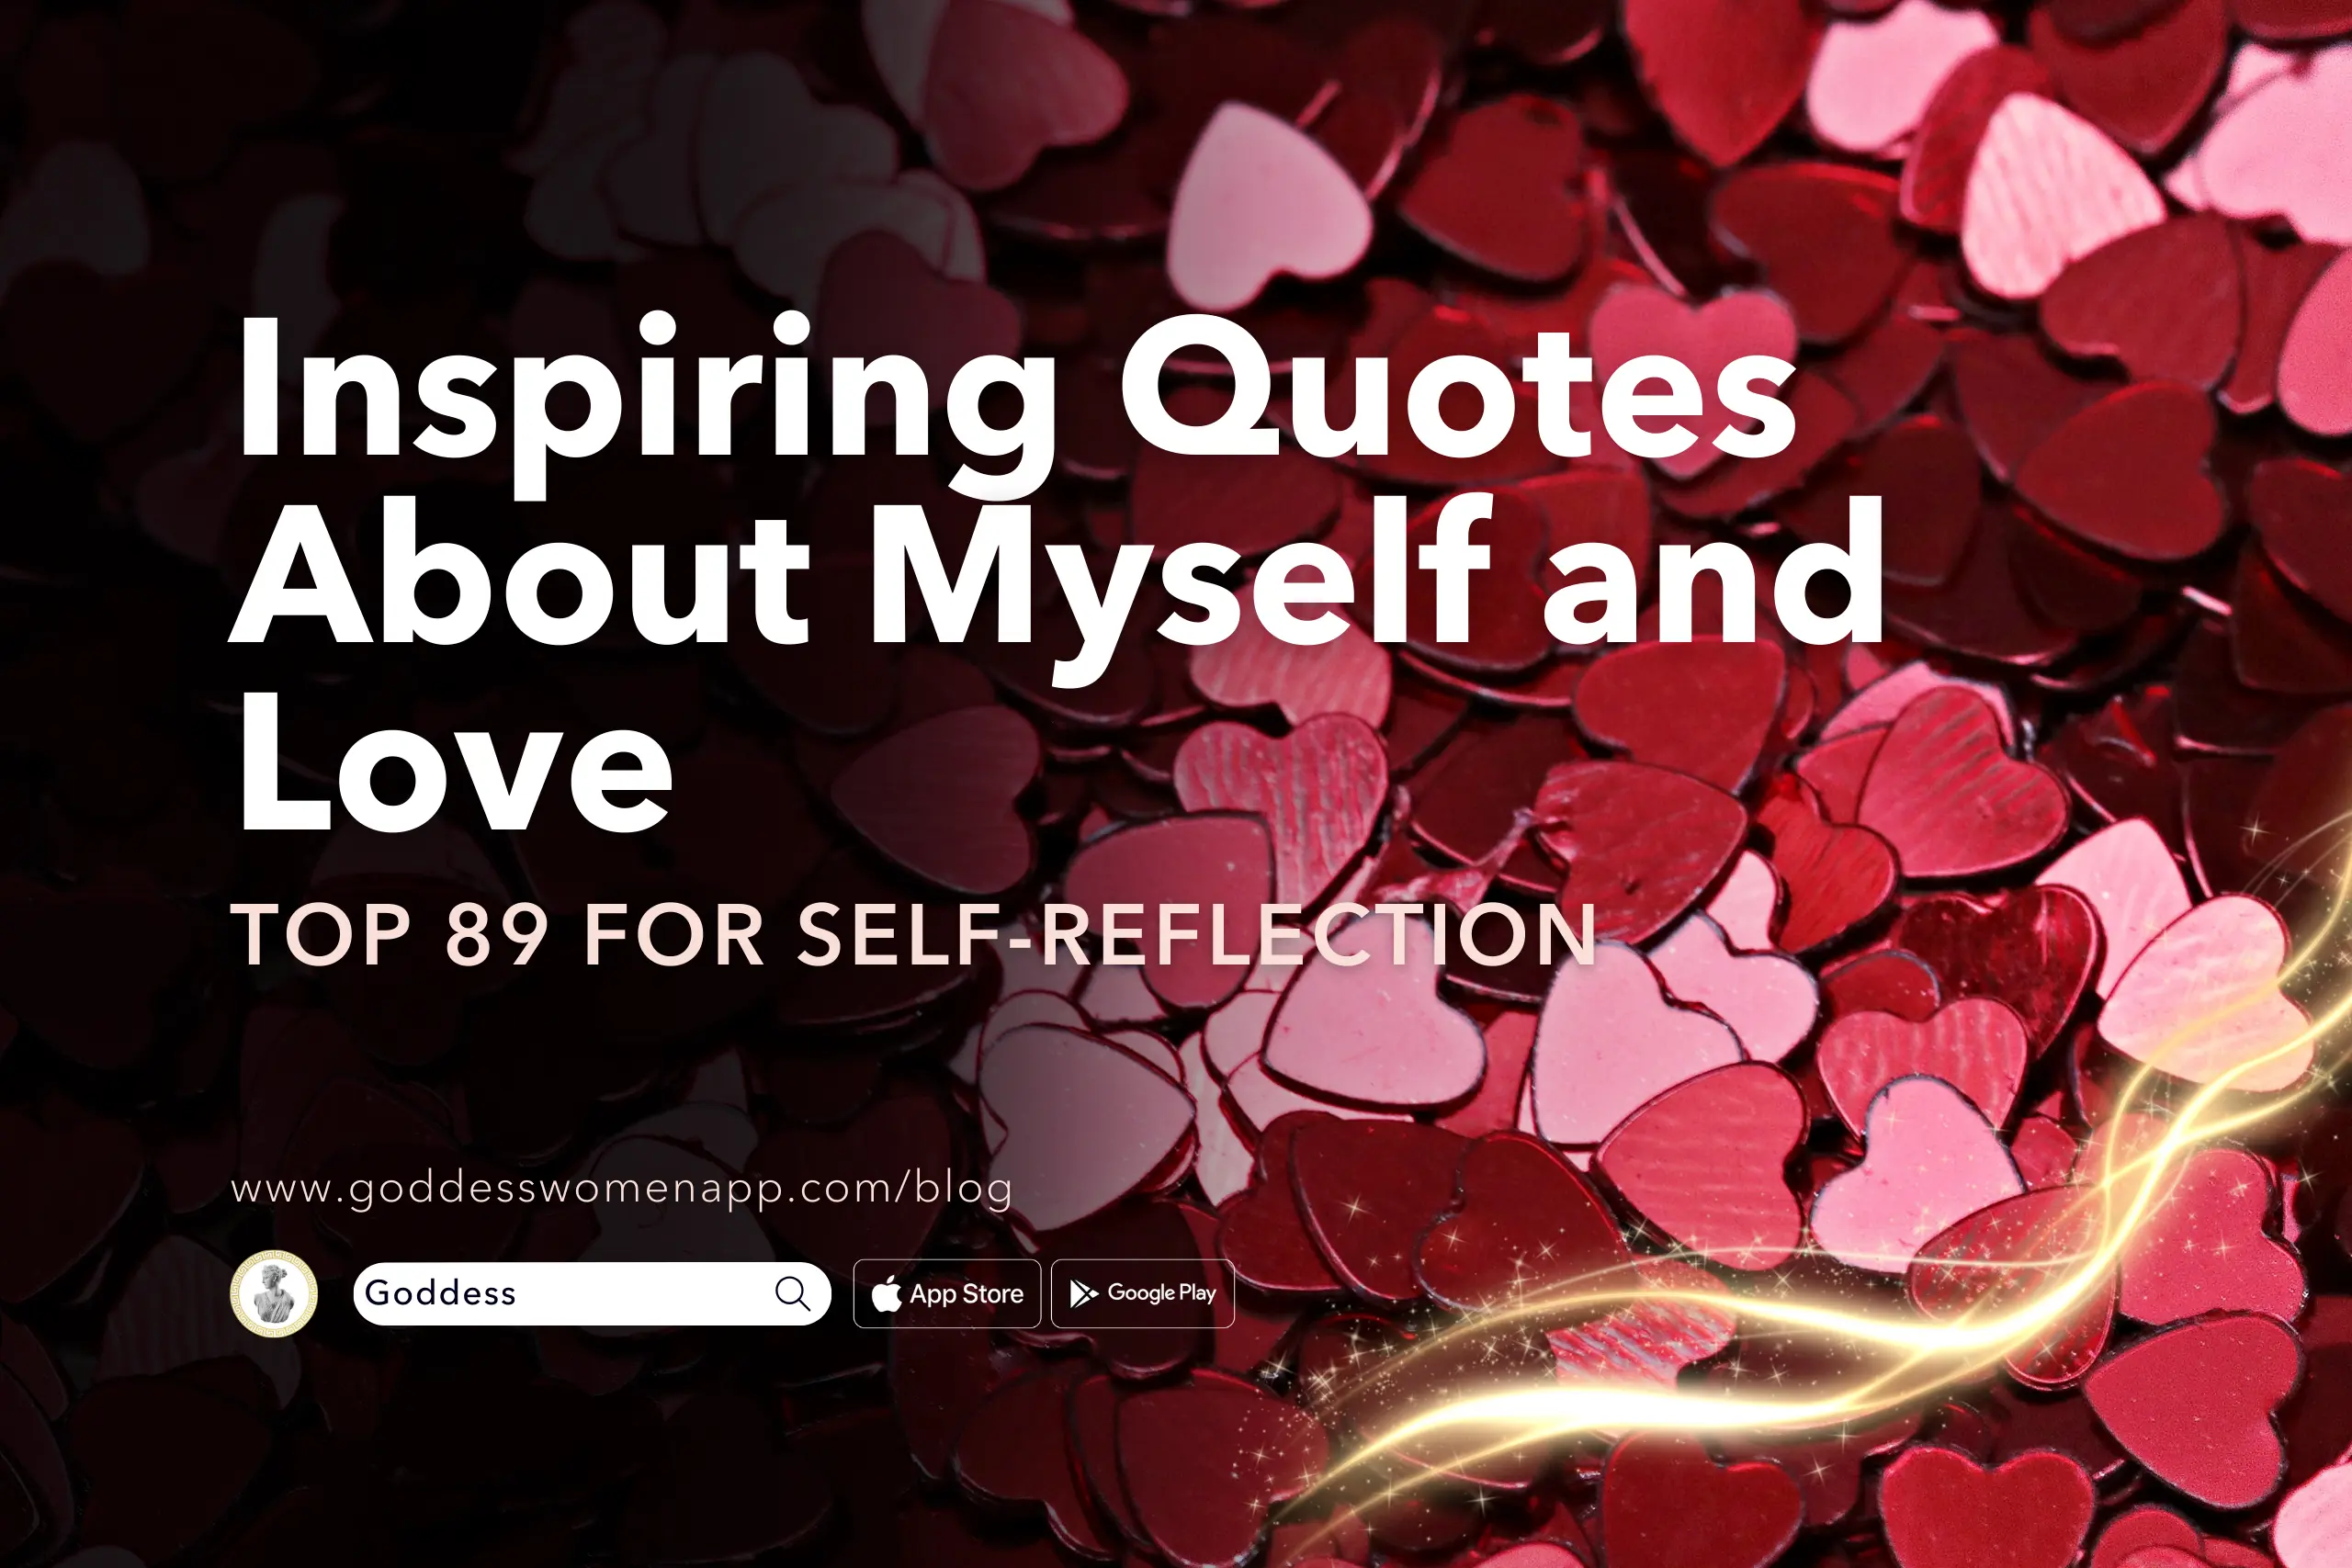 Top 89 Inspiring Quotes About Myself and Love for Self-Reflection